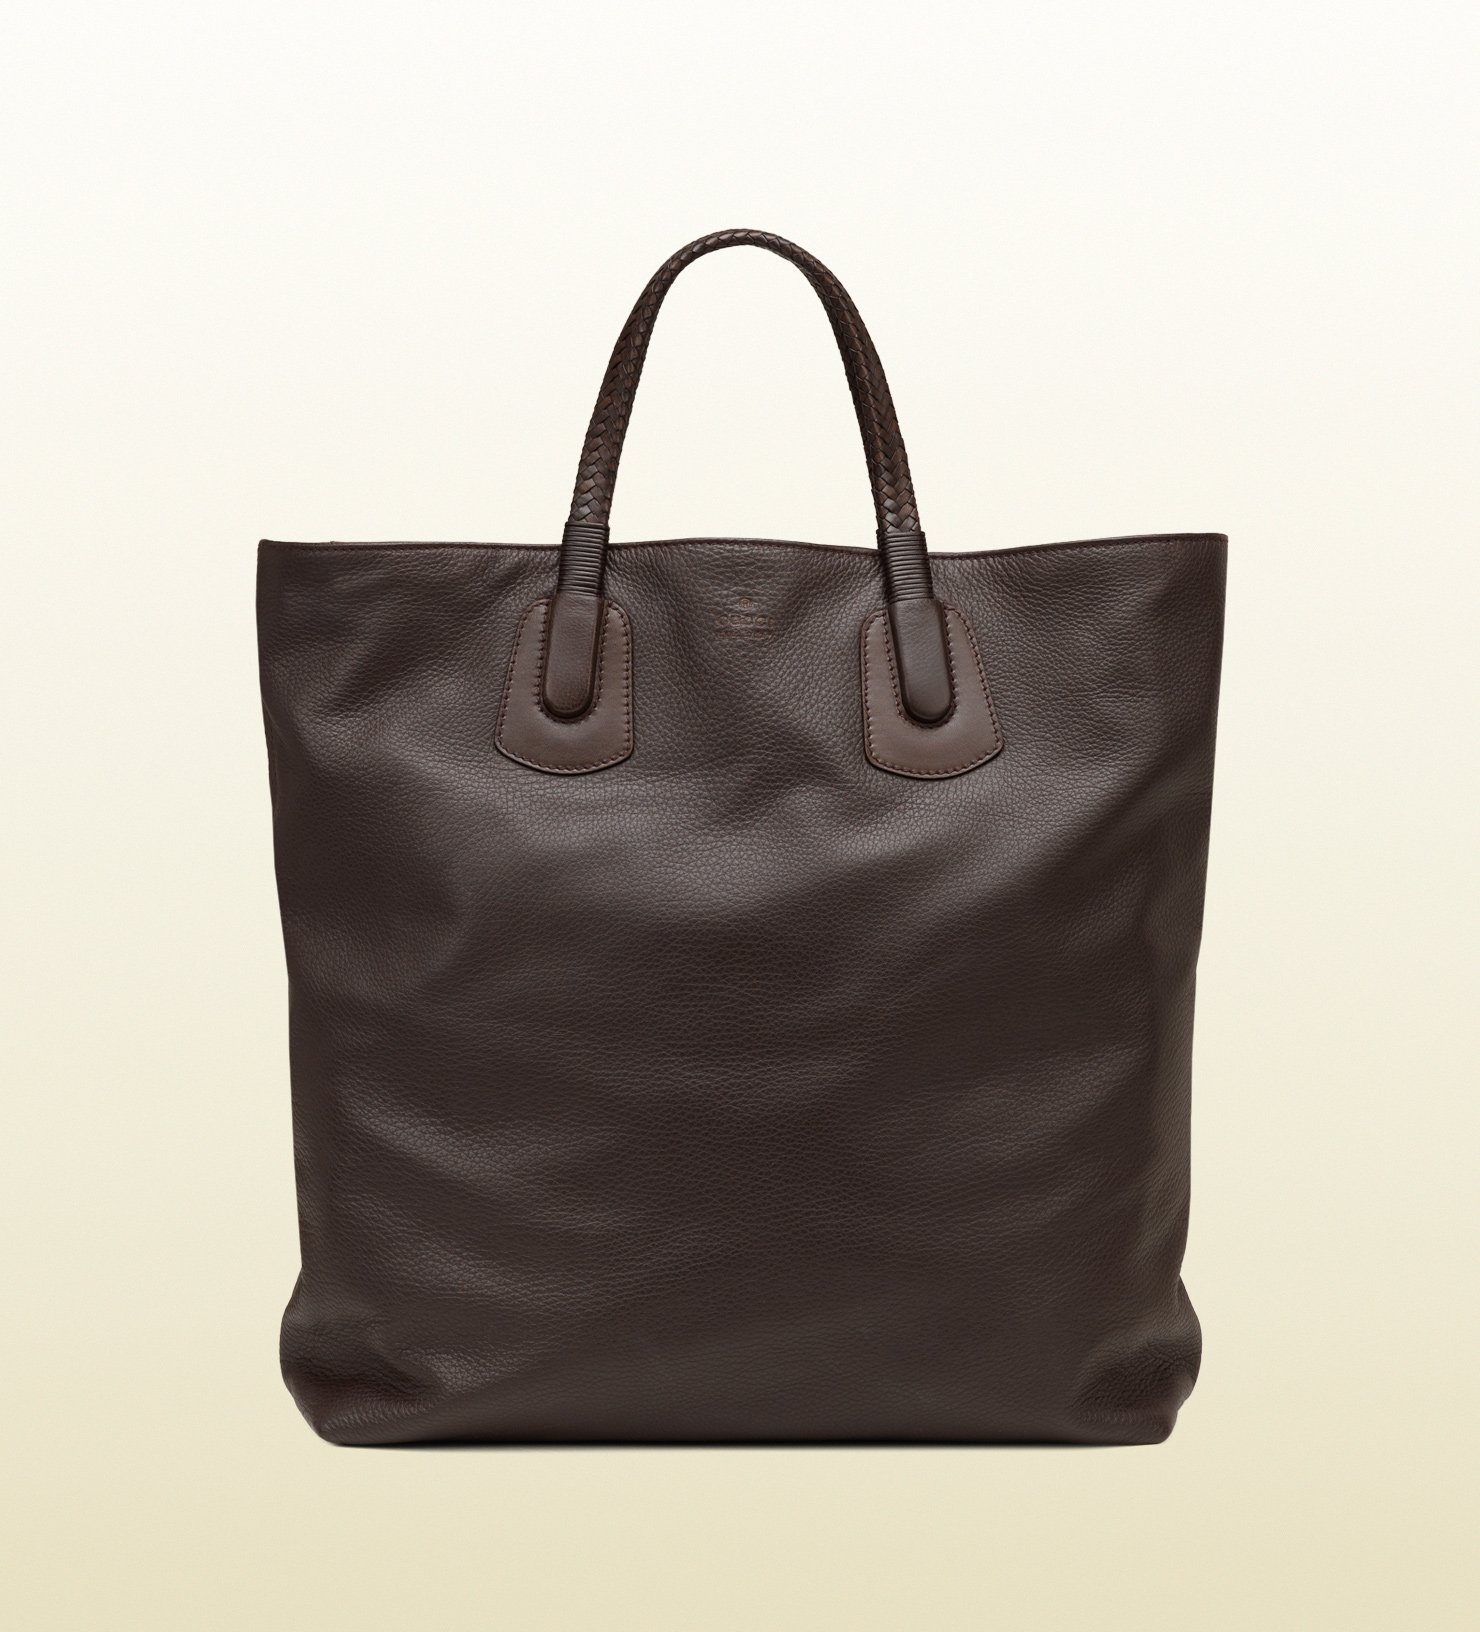 Gucci Dark Brown Leather Tote Bag in Brown | Lyst